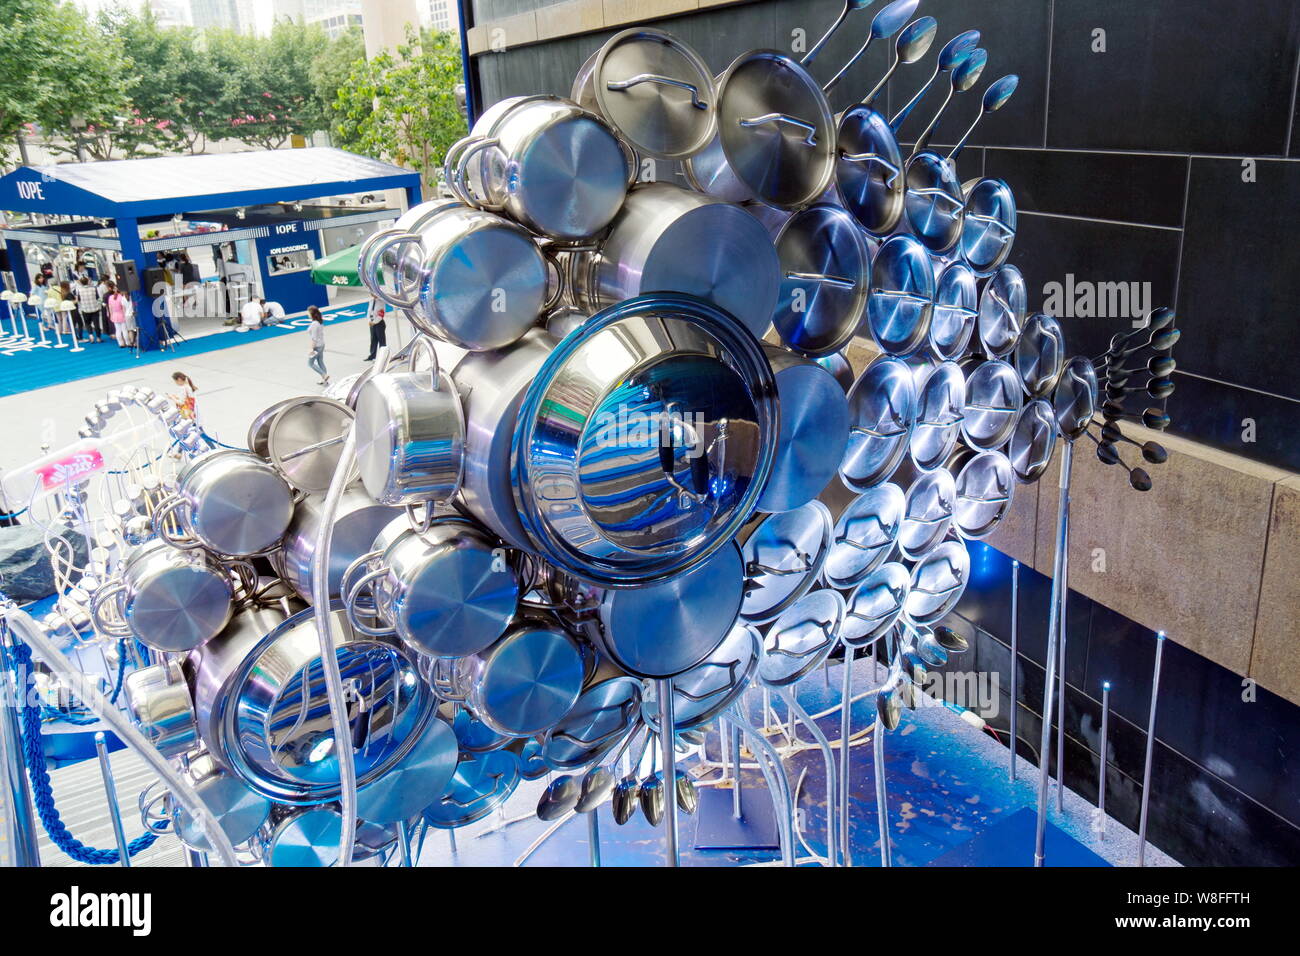 https://c8.alamy.com/comp/W8FFTH/a-giant-fish-made-out-of-cooking-utensils-is-on-display-during-a-promotional-event-by-german-cookware-maker-fissler-at-jiuguang-city-plaza-in-shanghai-W8FFTH.jpg